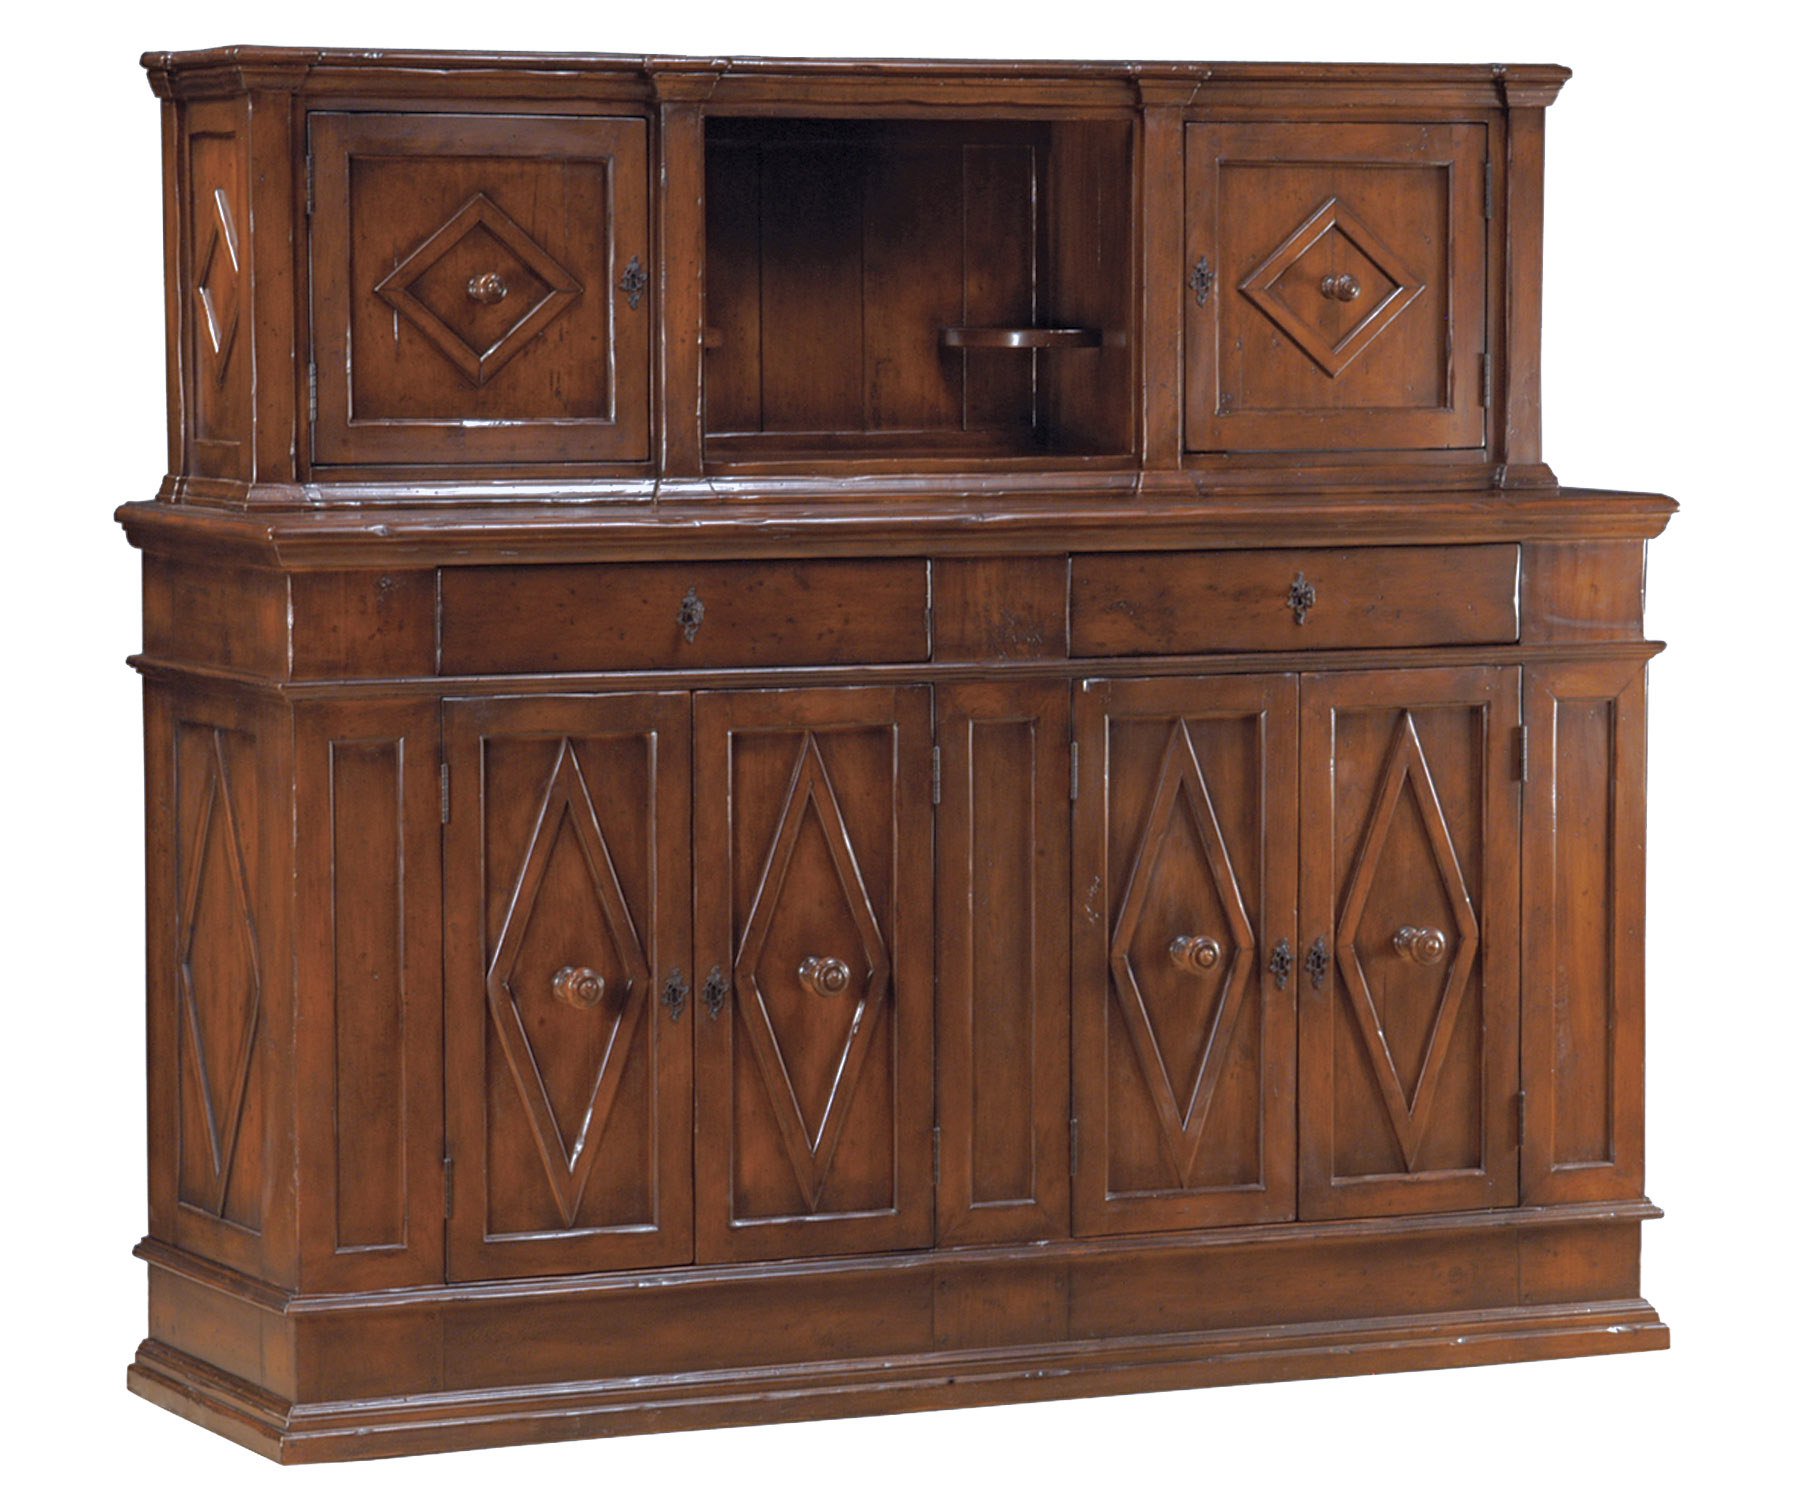 Hawkins sideboard cabinet with diamond detail by Woodland furniture in Idaho Falls